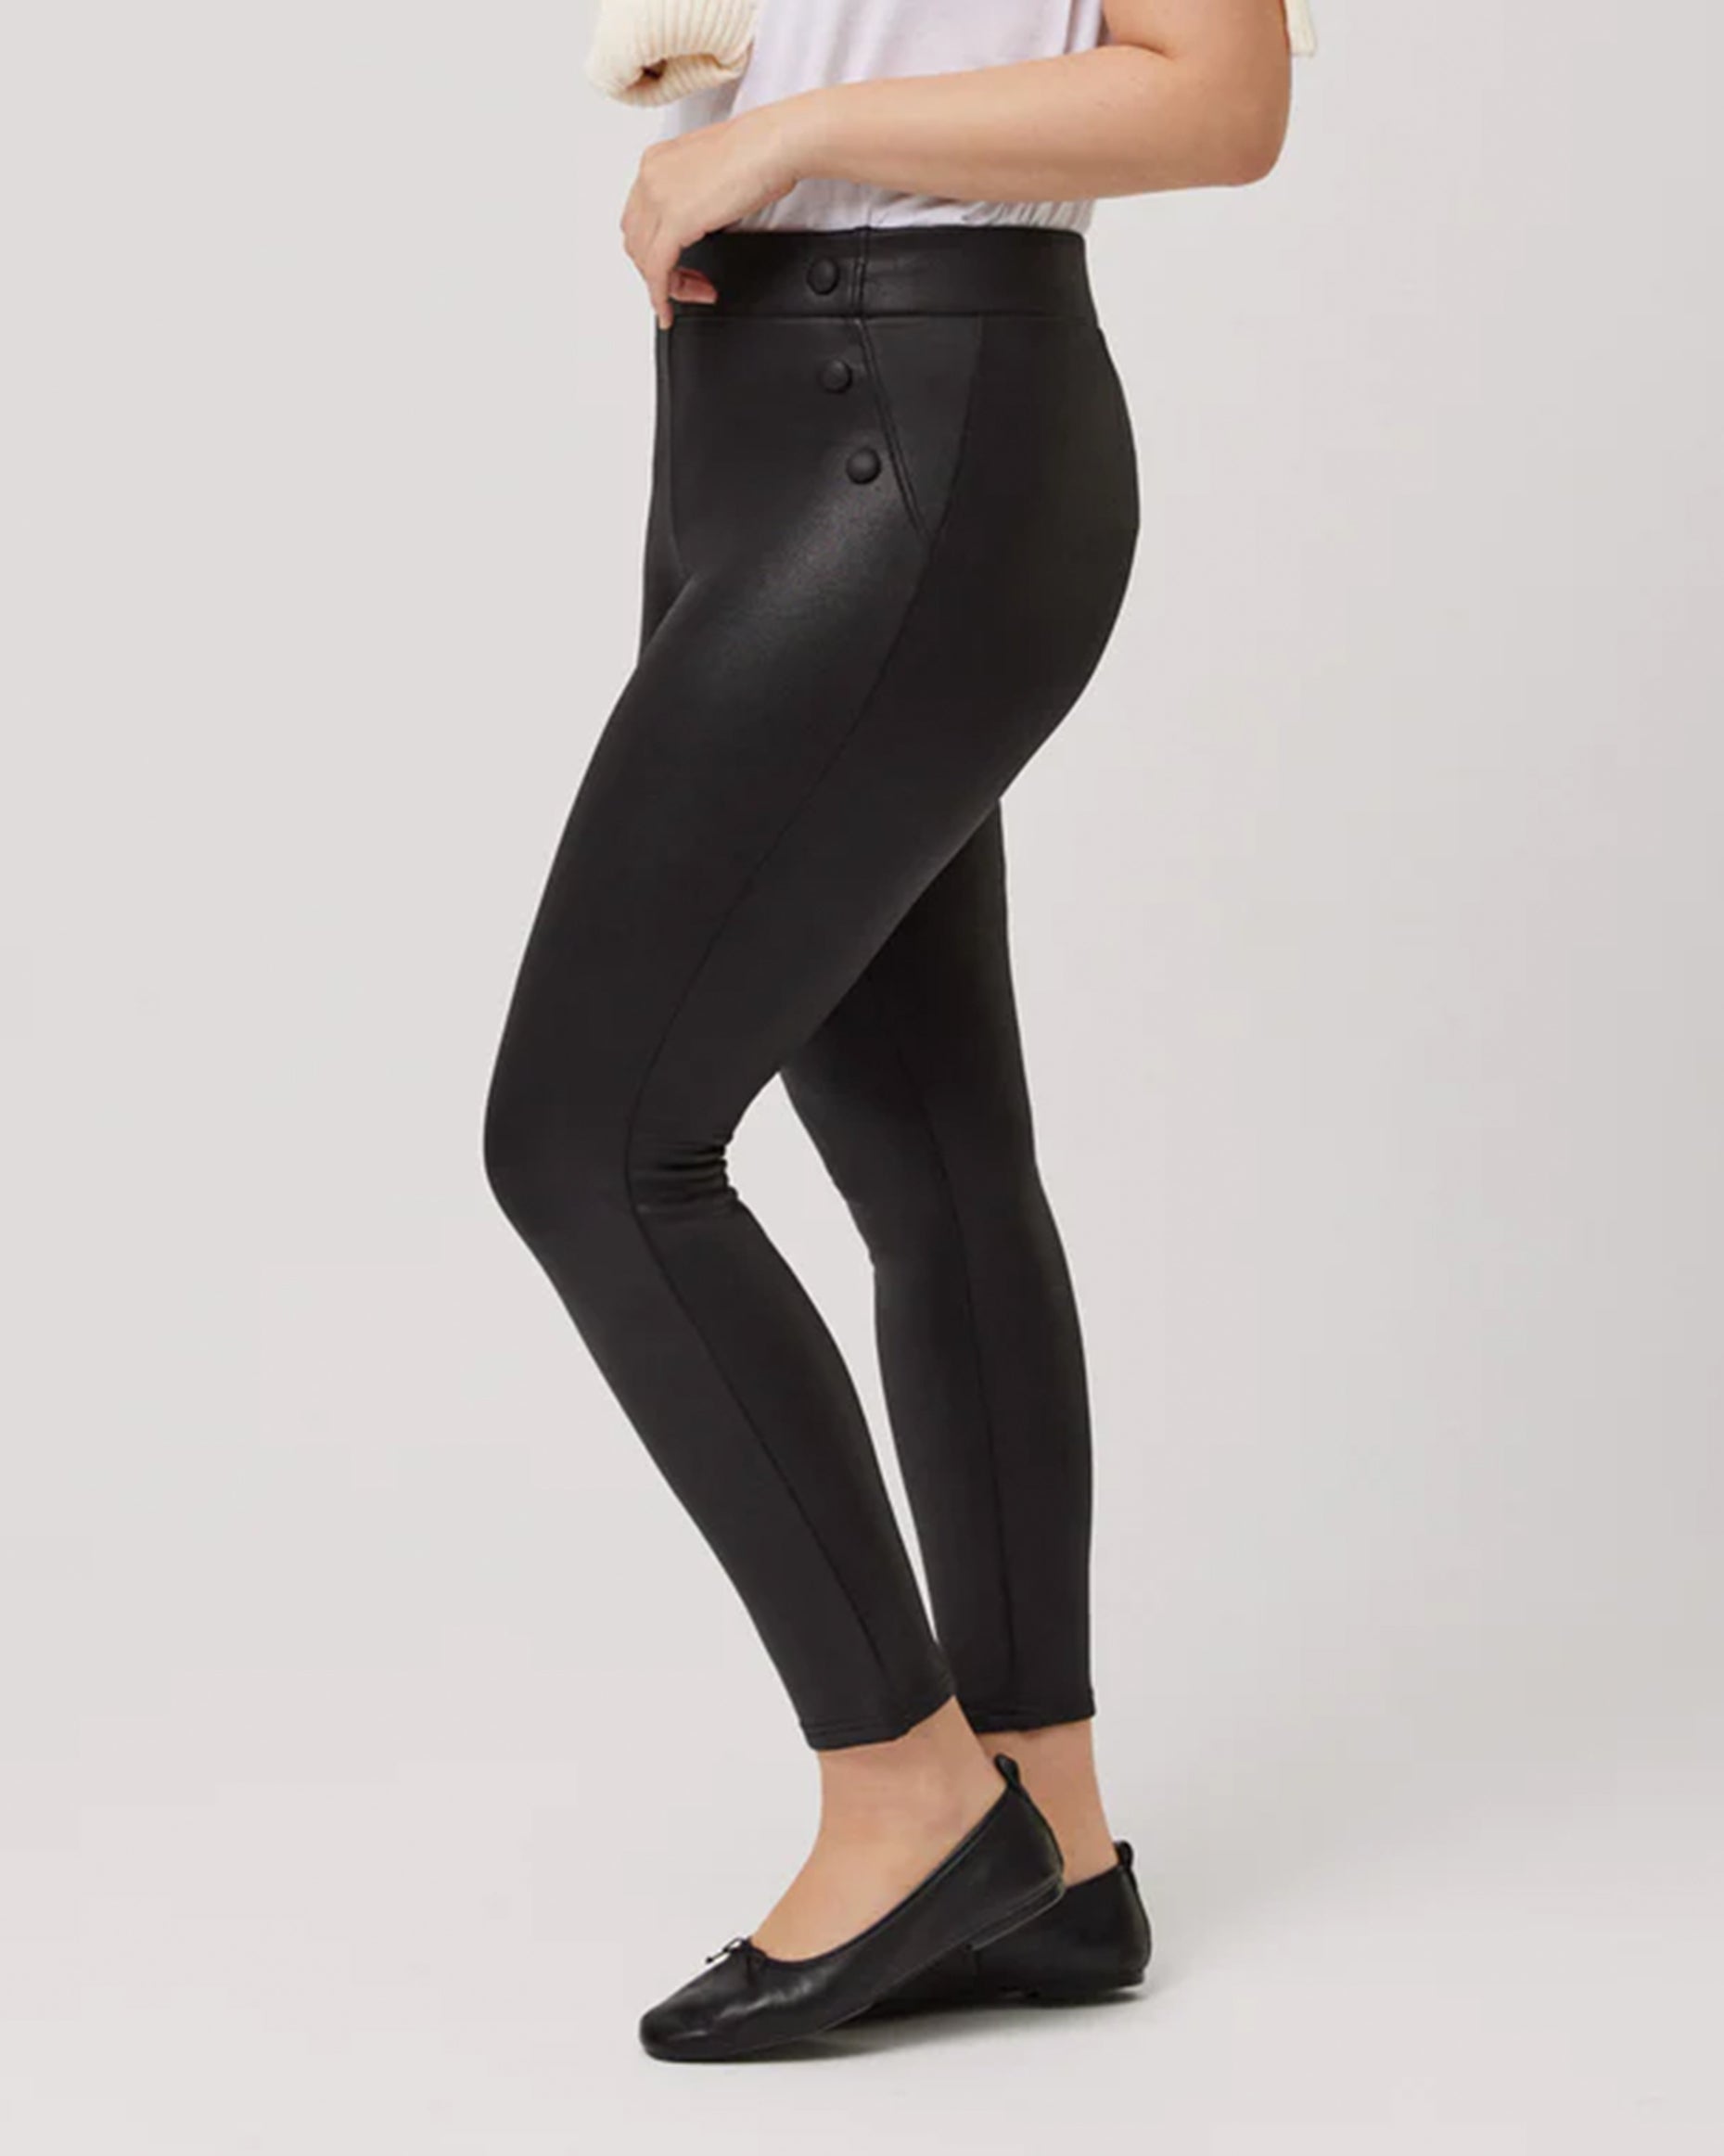 Ysabel Mora 70166 Waxed Thermal Leggings - High rise black trouser leggings with waxed effect finish, warm fleece lining, faux front pockets with covered buttons and deep elasticated waistband. Side view.